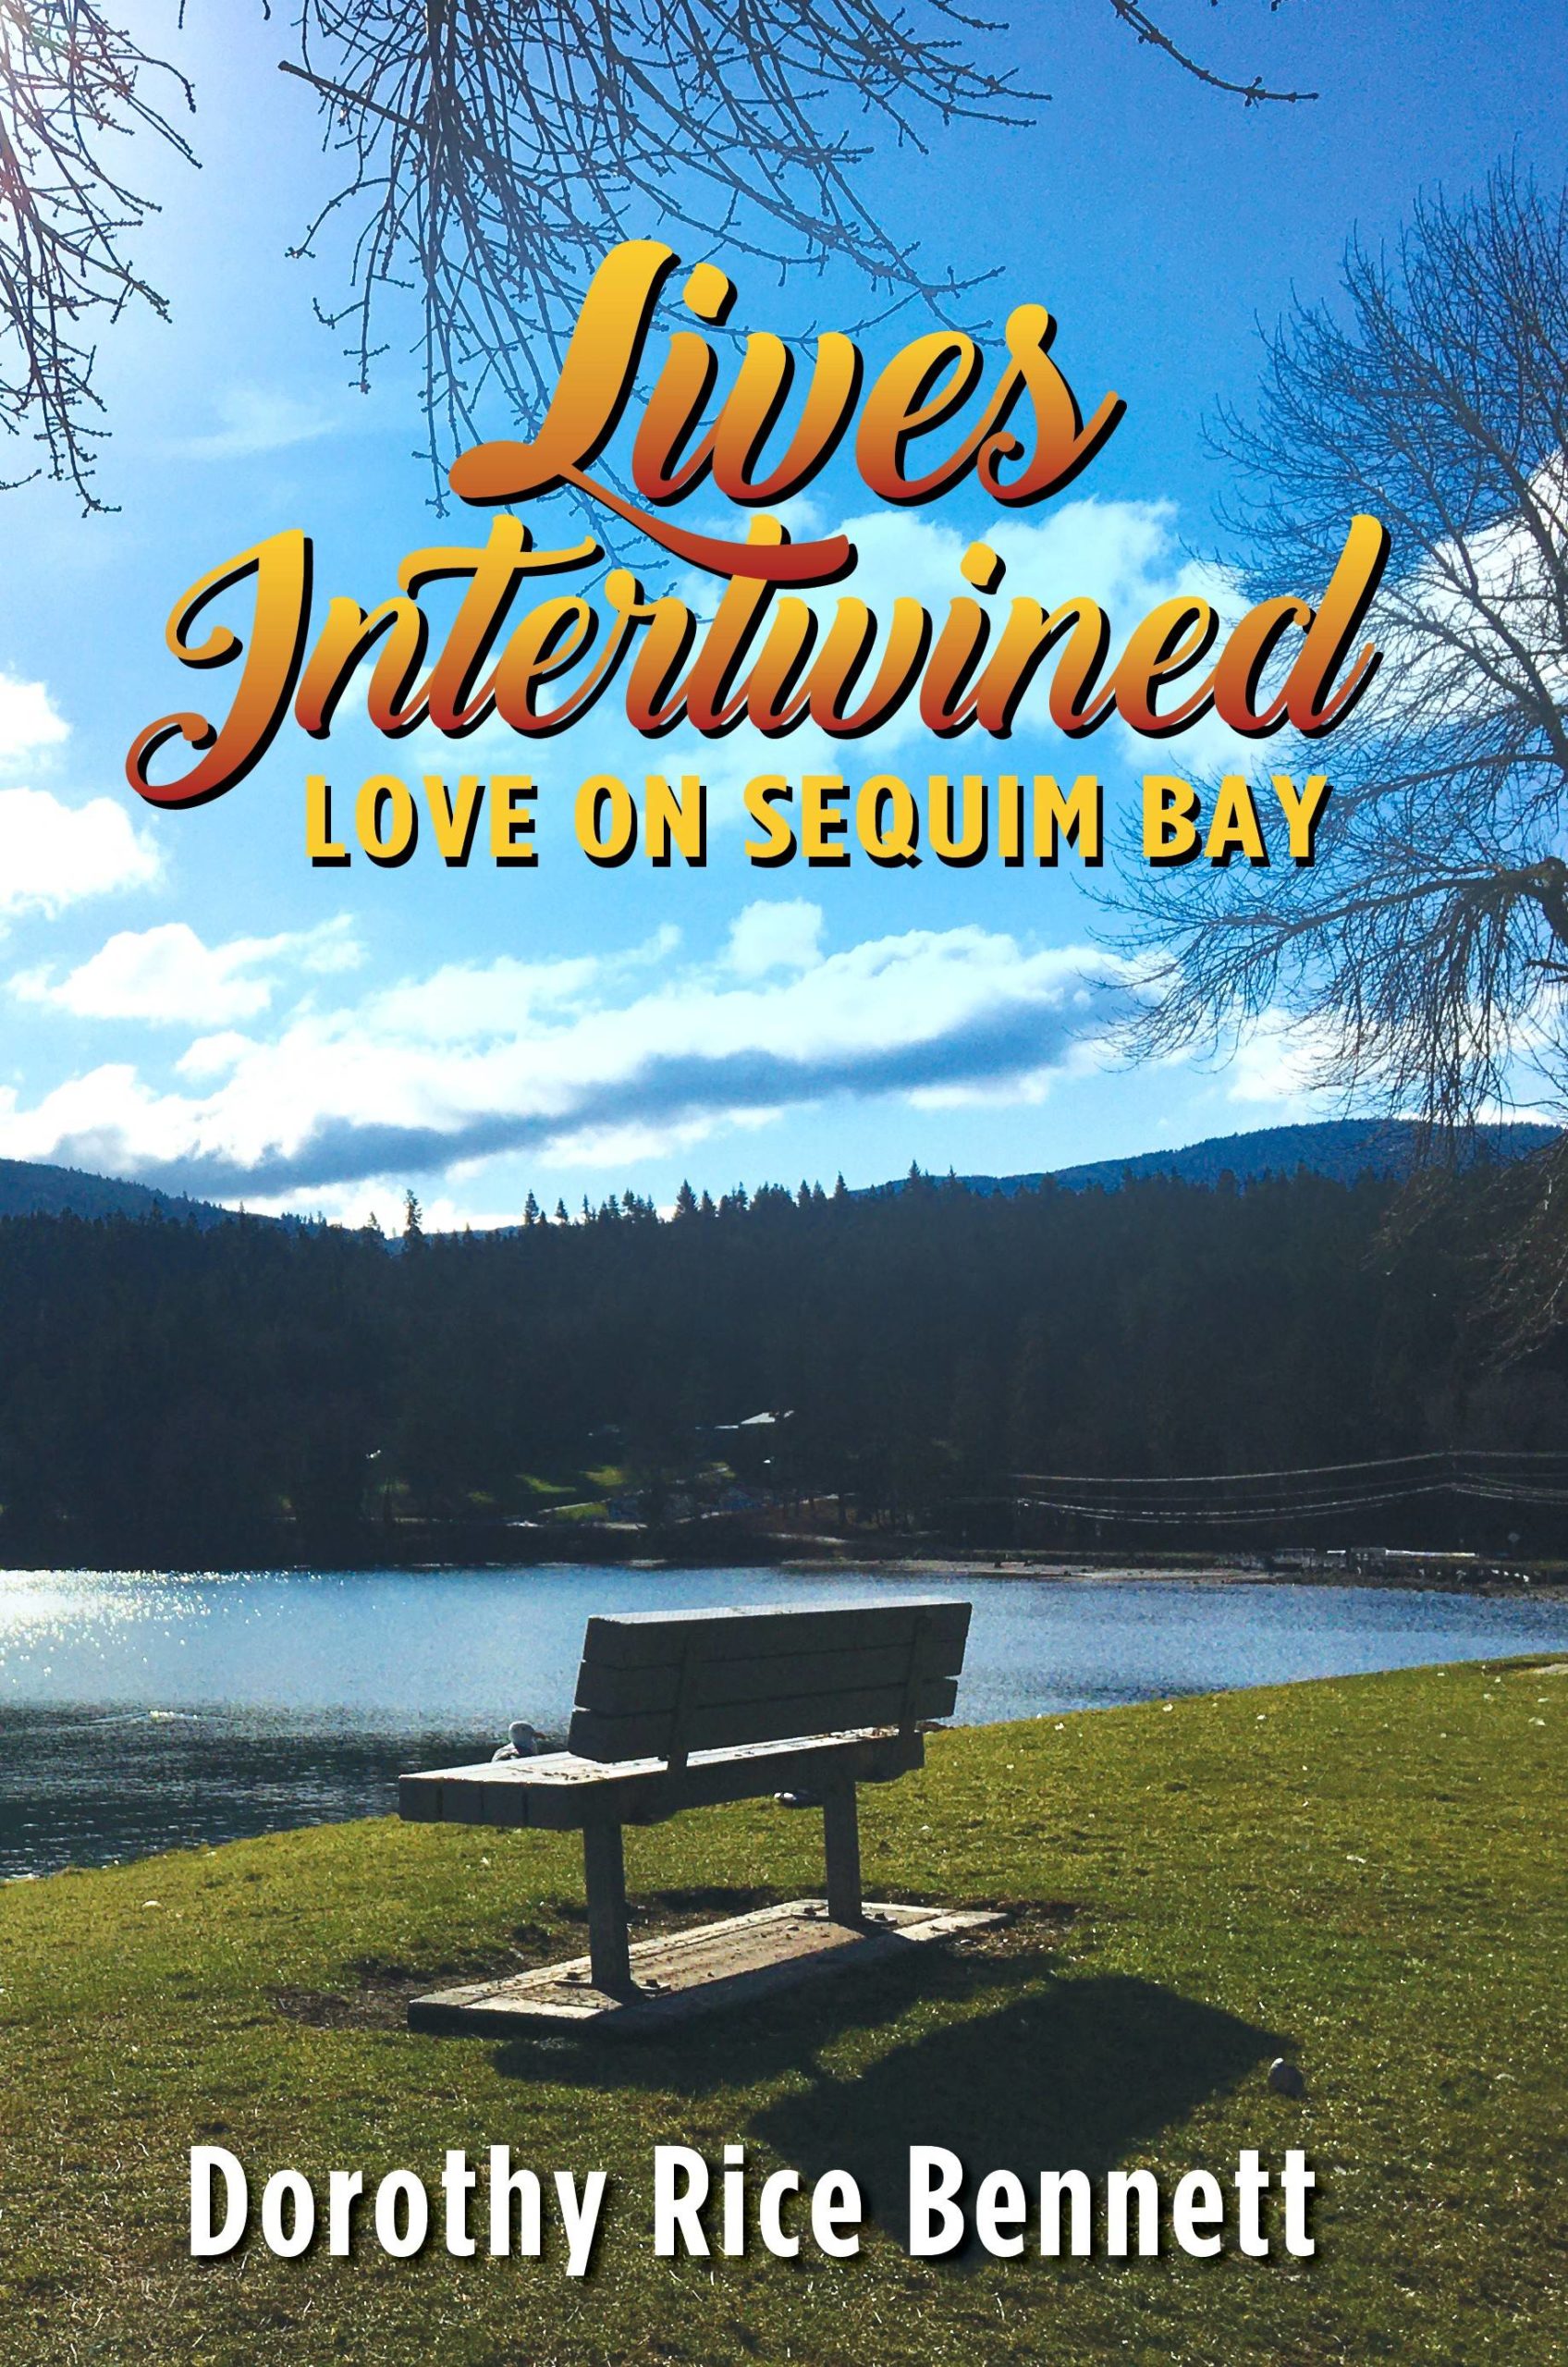 “Lives Intertwined: Love on Sequim Bay” brings six women together and finding romance in the Sequim area. It’s Dorothy Rice Bennett, aka Alice McCracken’s fifth book. Submitted photo